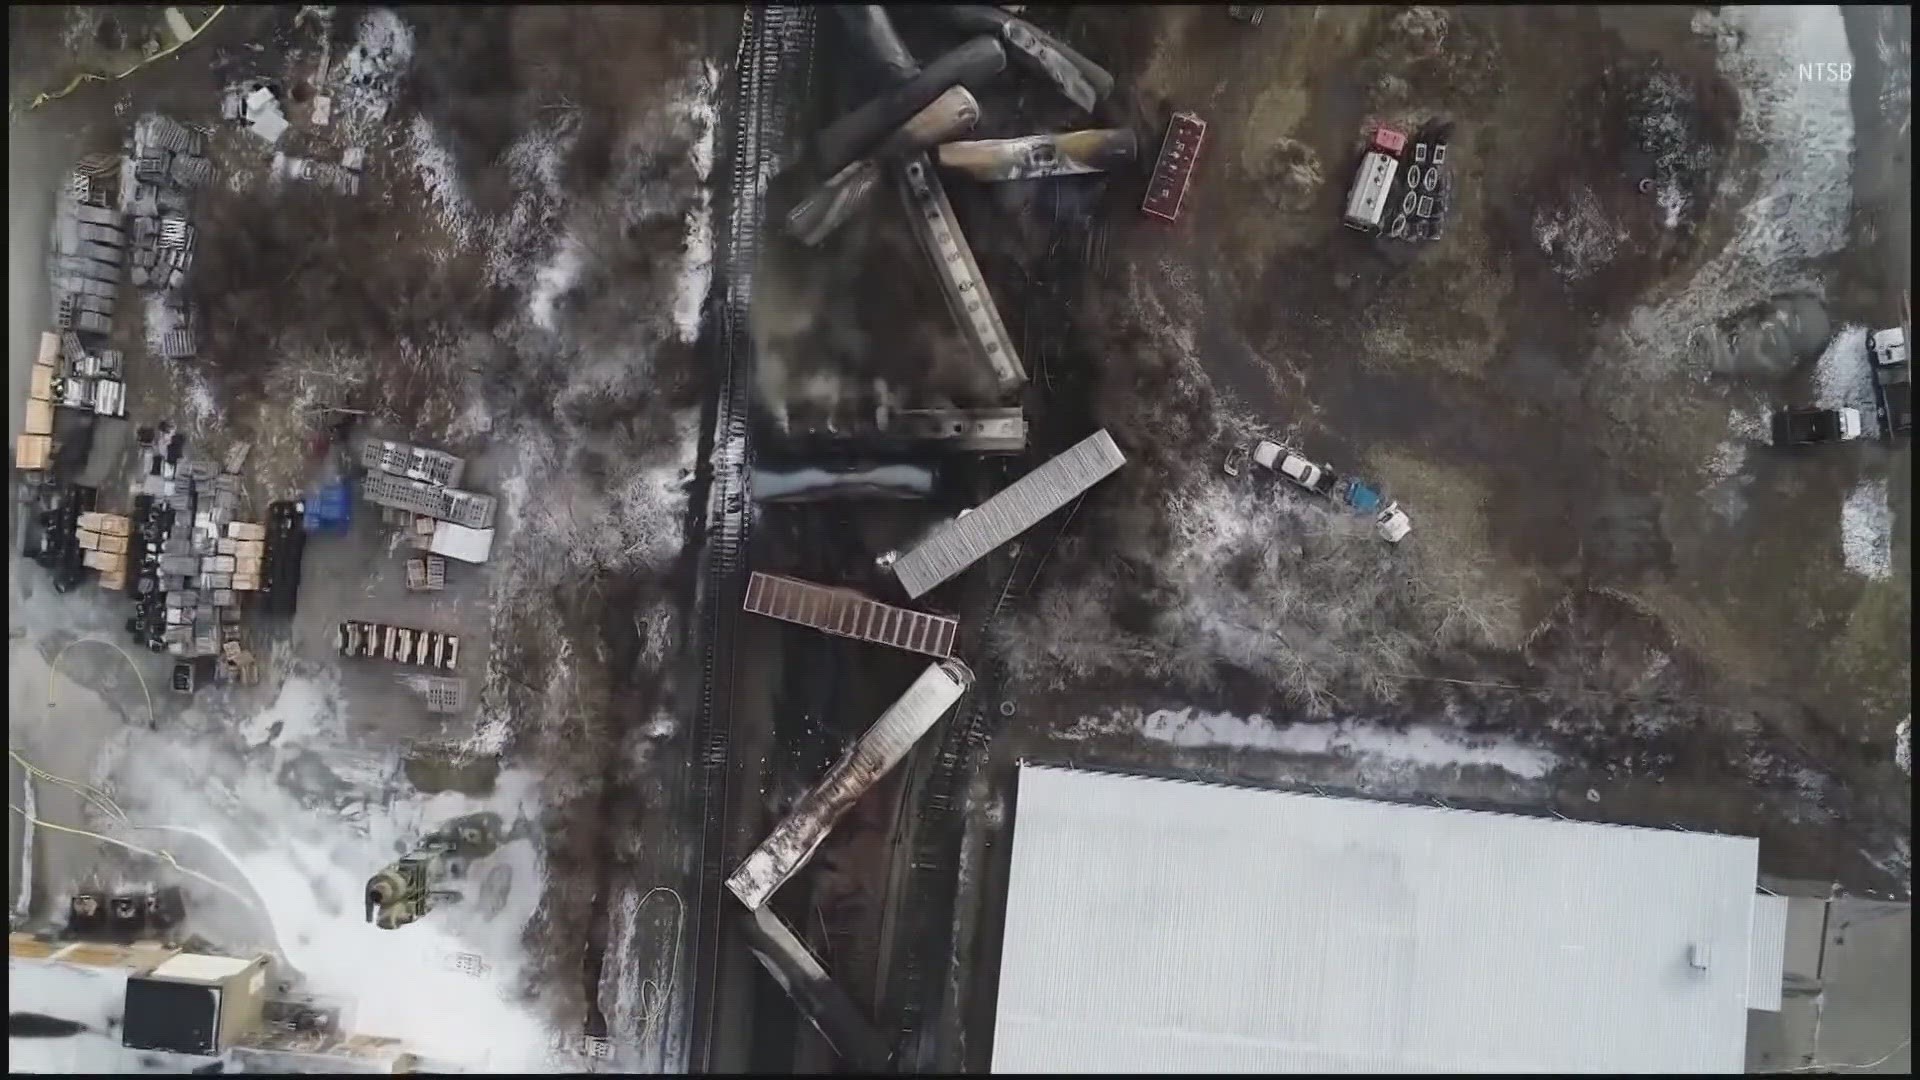 The Norfolk Southern train derailed in East Palestine on February spilling harmful chemicals like vinyl chloride.